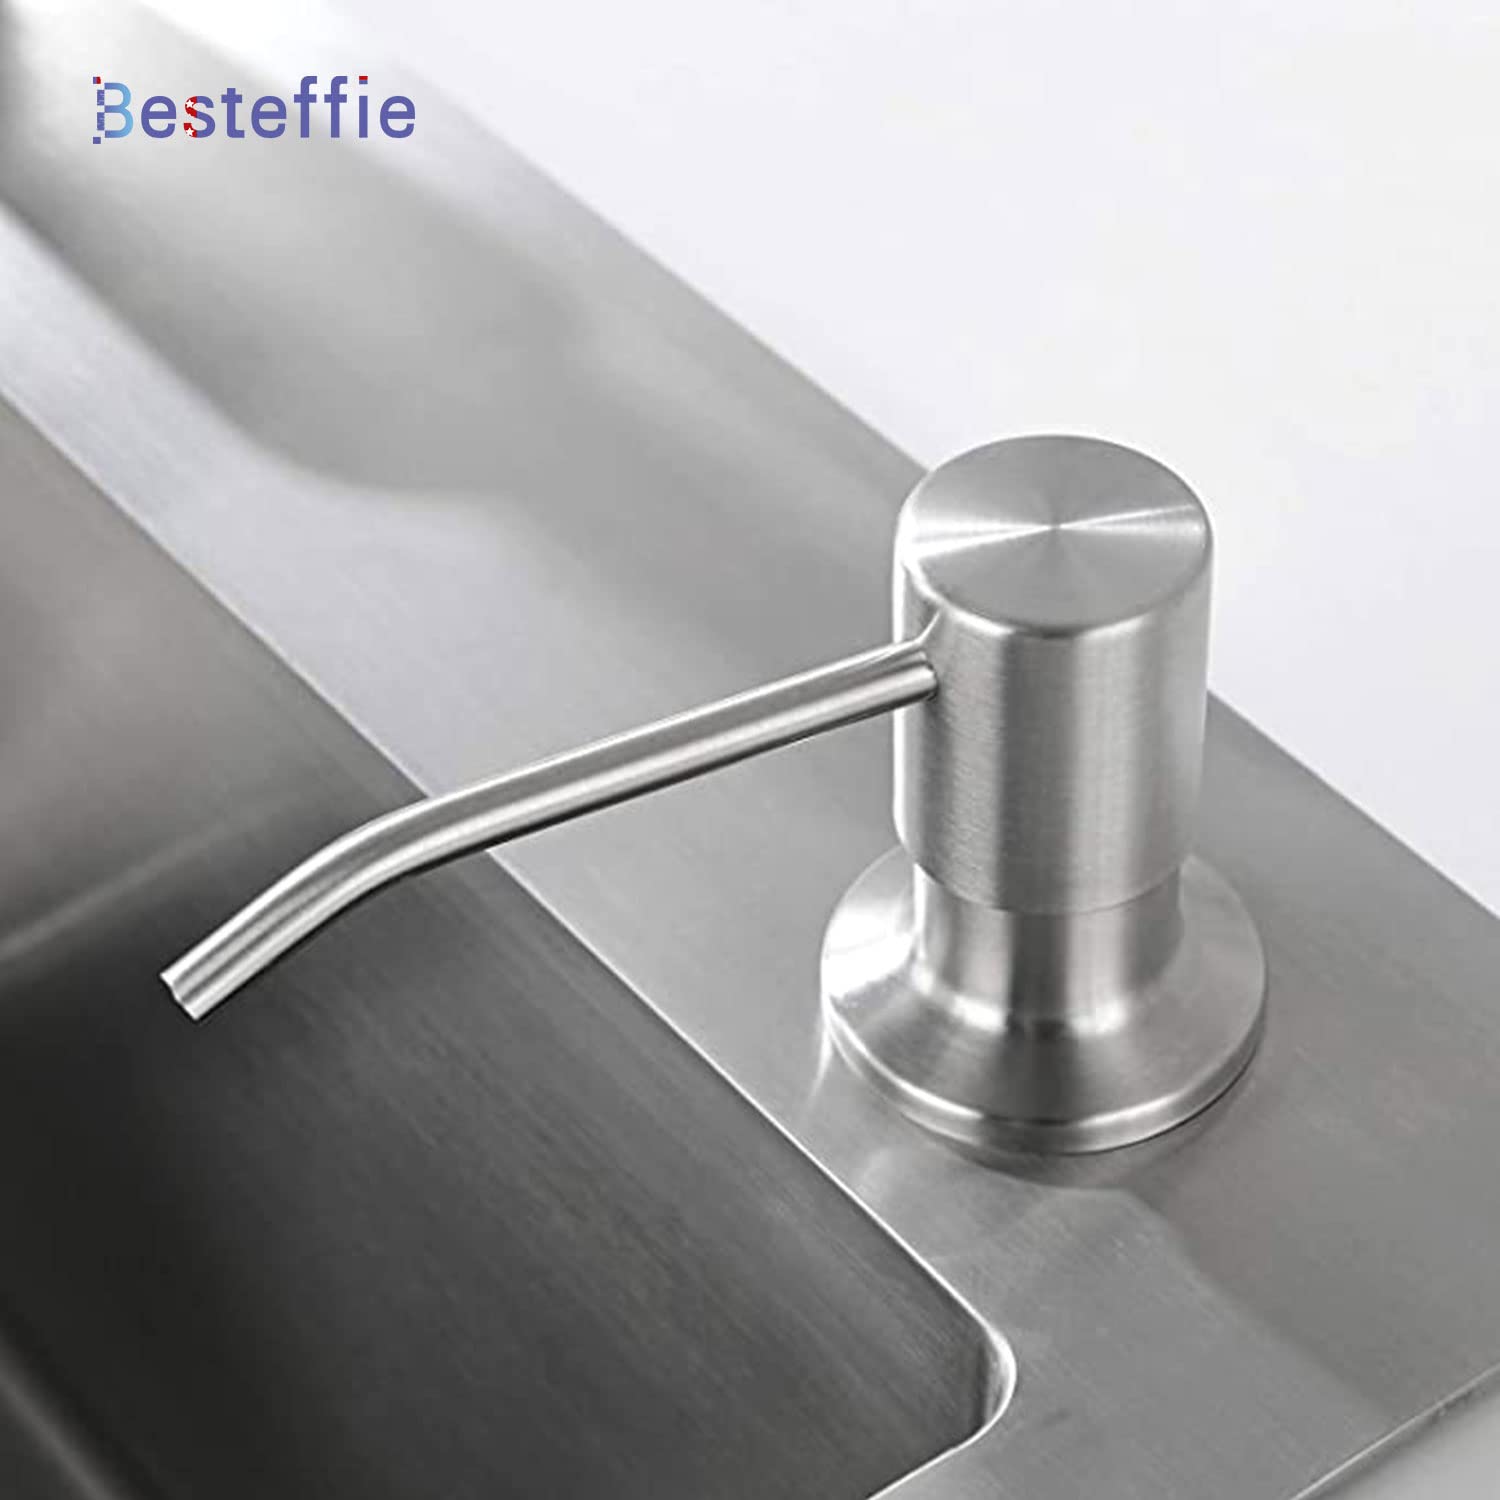 Soap Dispenser for Kitchen Sink,Kitchen soap Dispenser,47" Tube Connects Directly to Soap Bottle,No More Refills(Brushed Nickel).